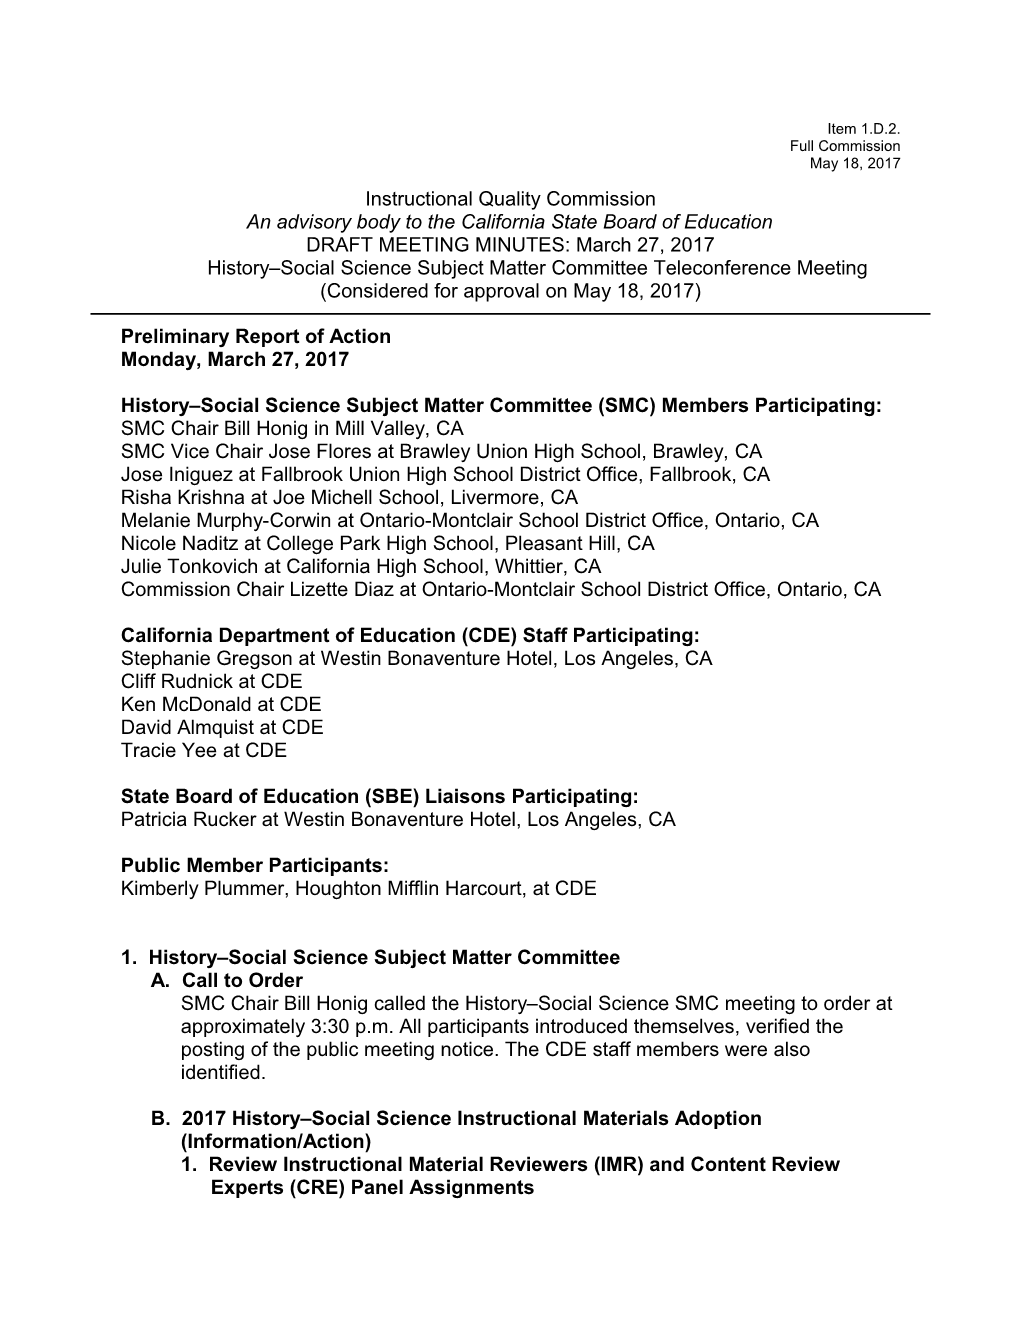 March 2017 HSS SMC Meeting Minutes - Instructional Quality Commission (CA Dept of Education)